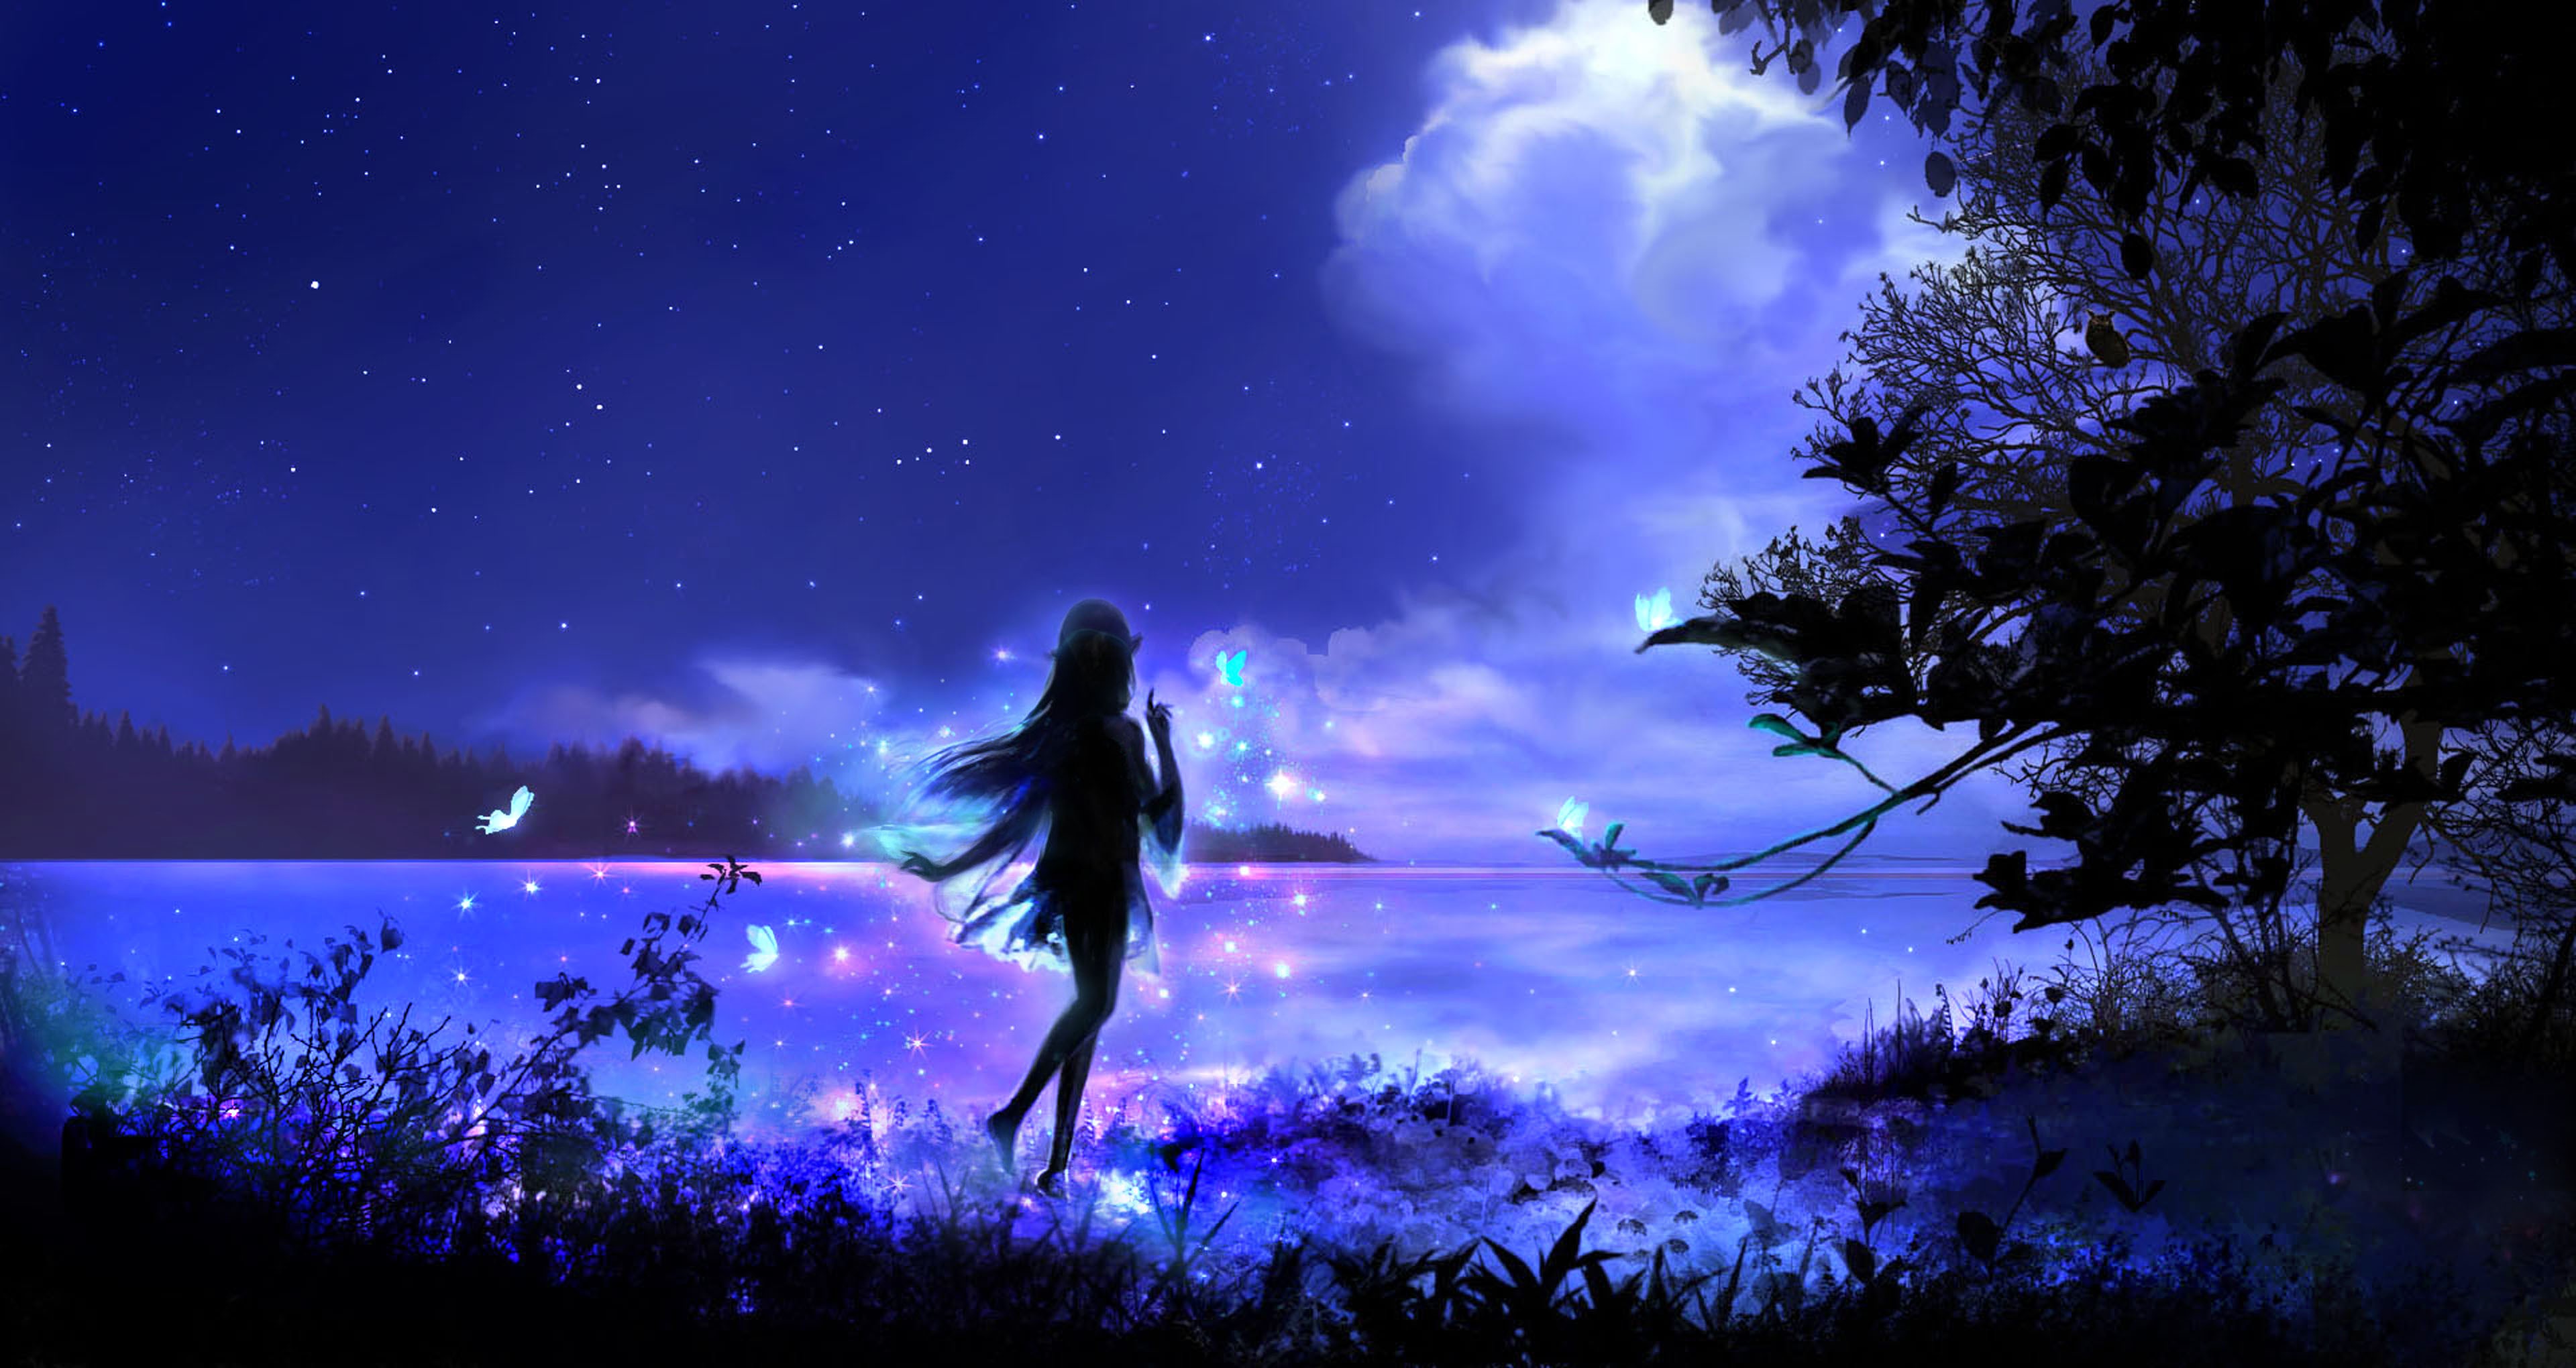 Anime 3840x2040 forest fairies lake stars night clouds